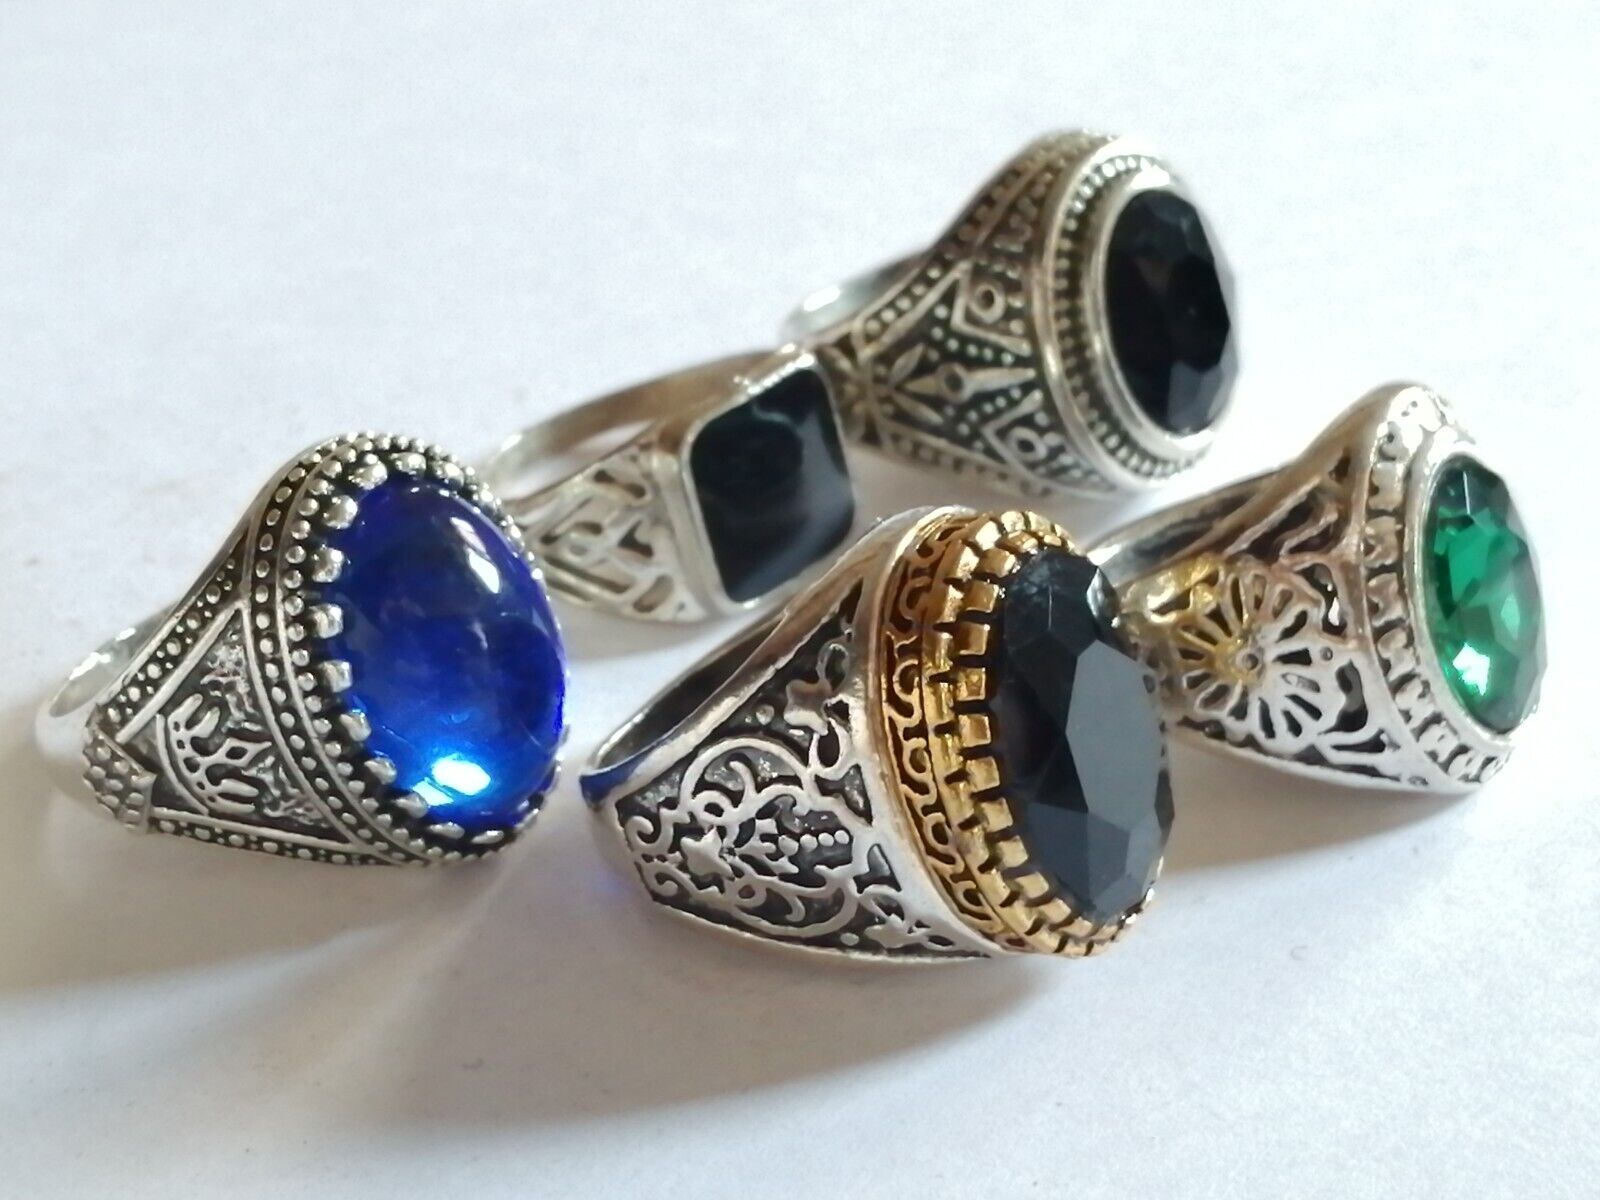 MAGNIFICENT VINTAGE POST MEDIEVAL SILVERED RINGS WITH STONE INSERT GROUP RINGS